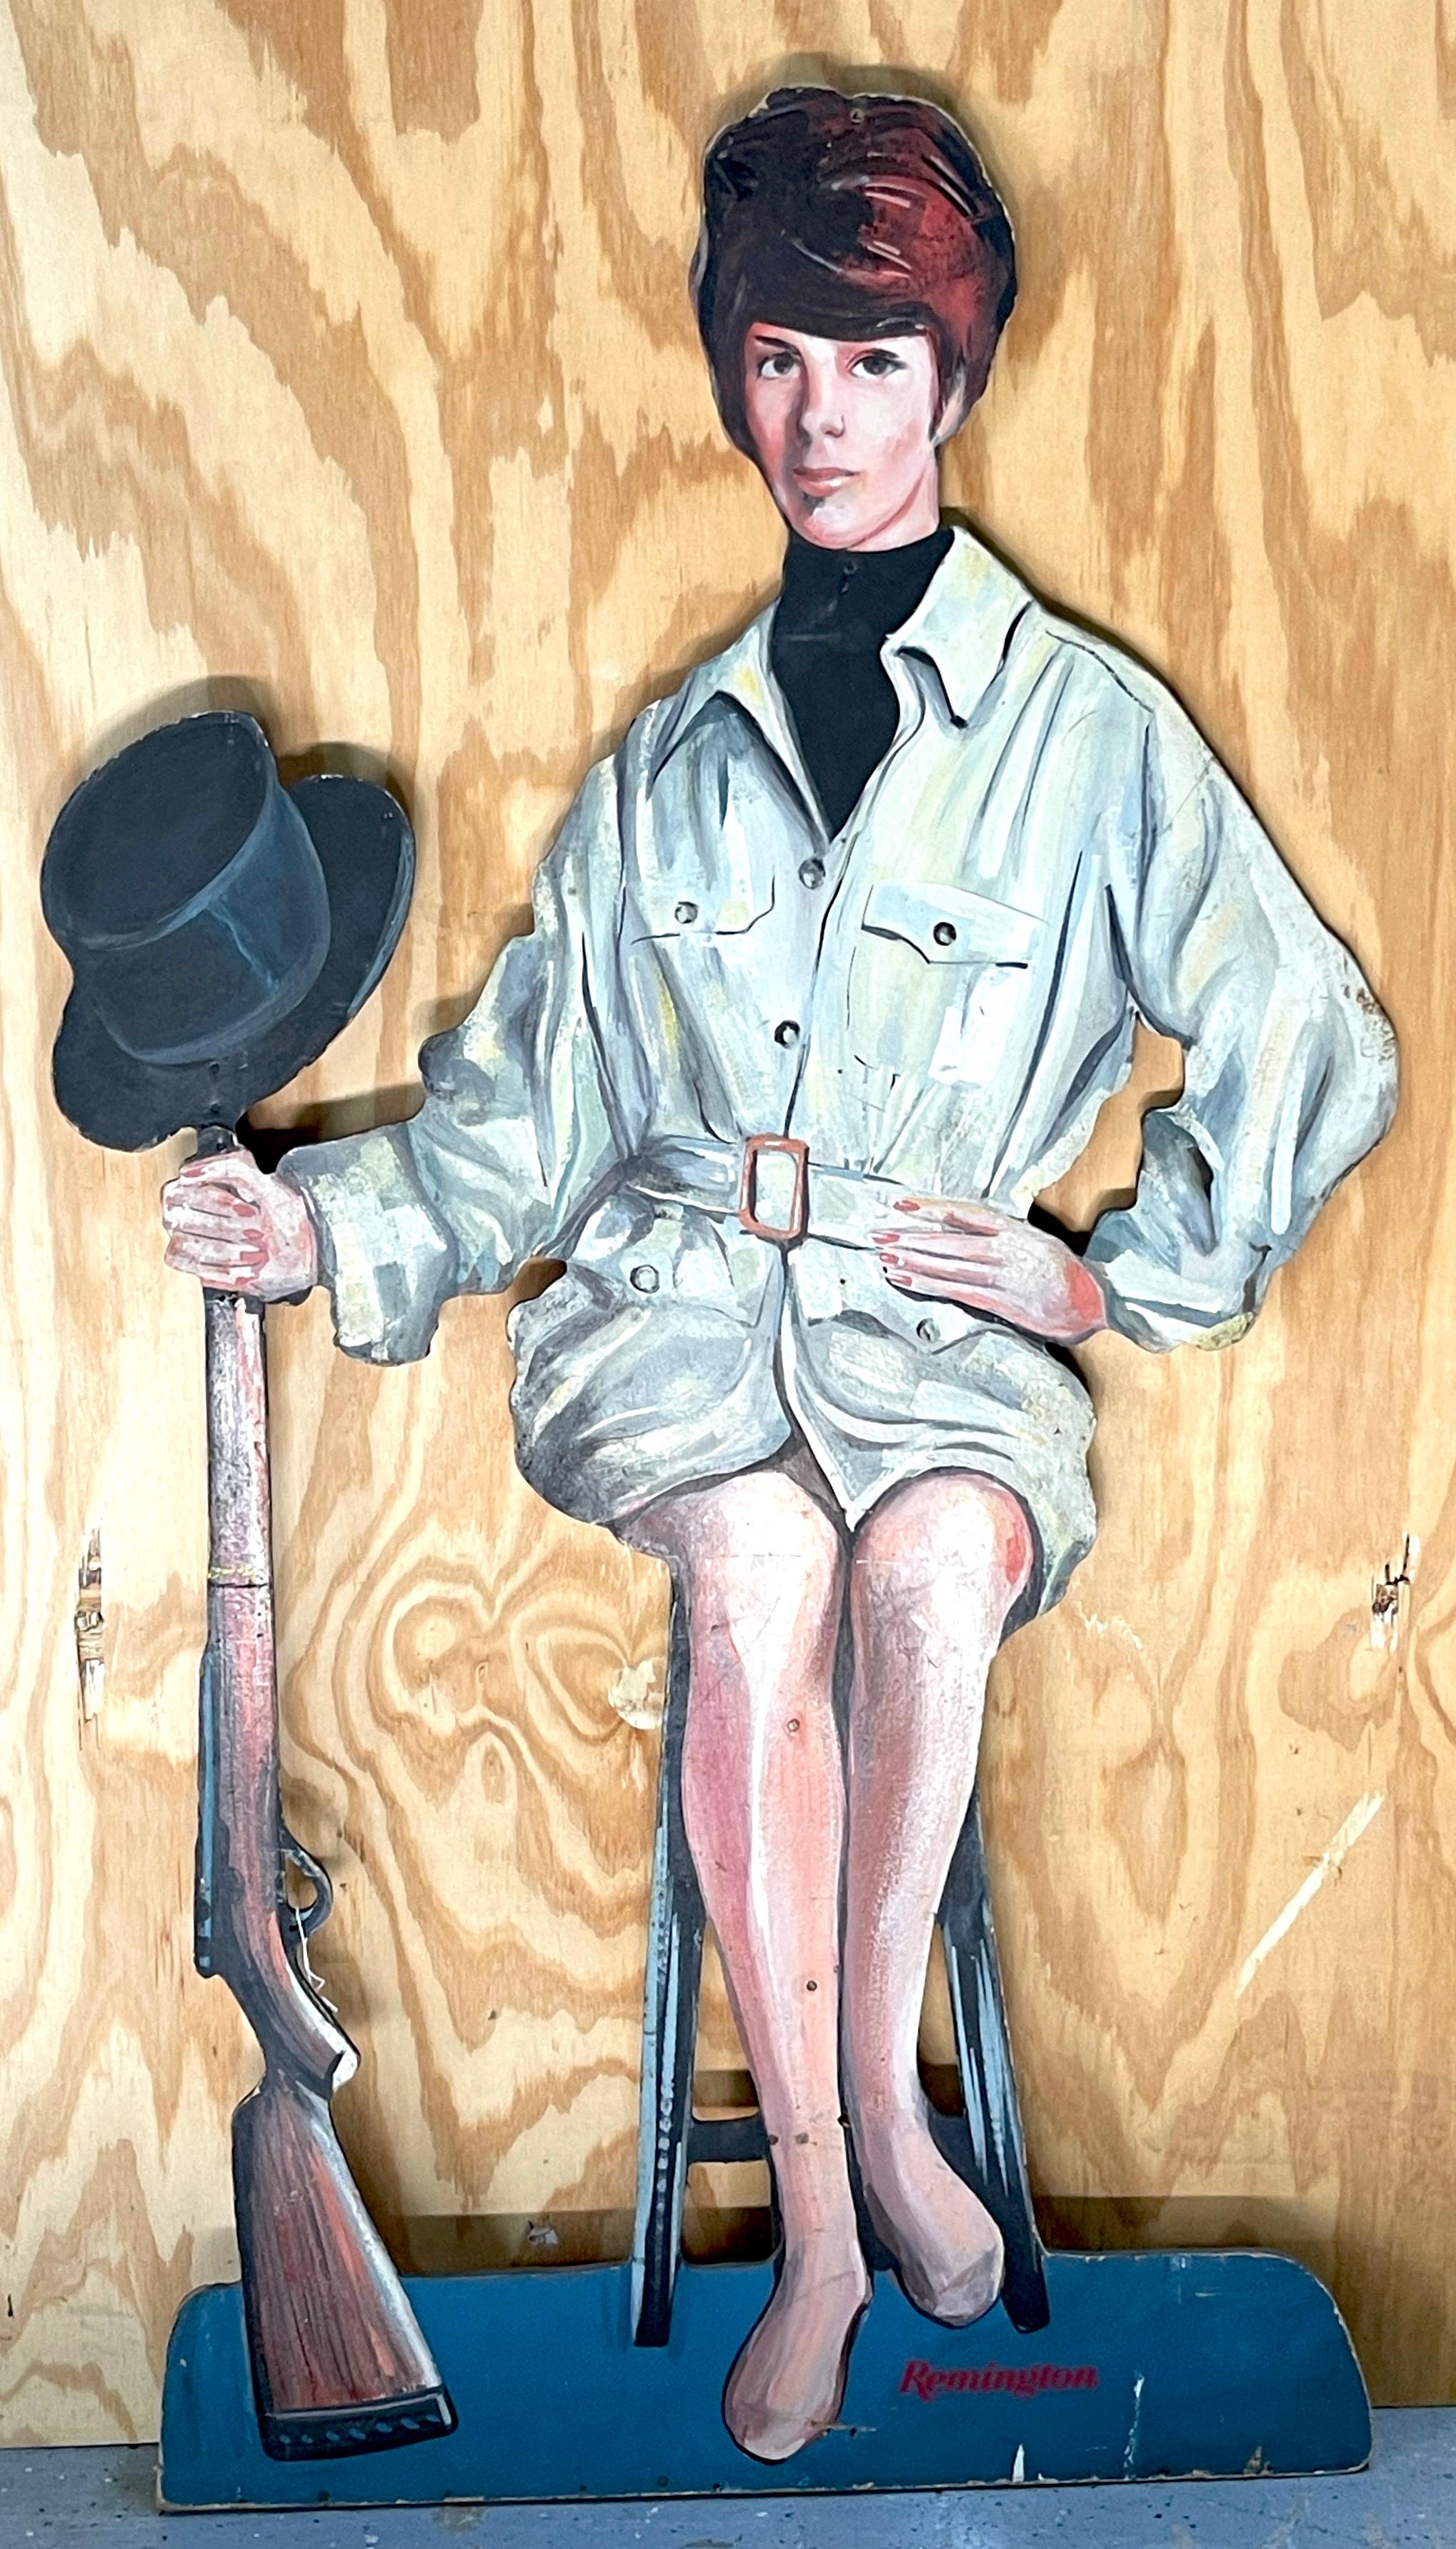 A unique and possibly one-of-a-kind advertising piece from the 1960s, the Remington Rifle Life Size Advertising Dummy Board. This custom store advertising board was created to promote Remington Rifles and features a captivating period 1960s Mod